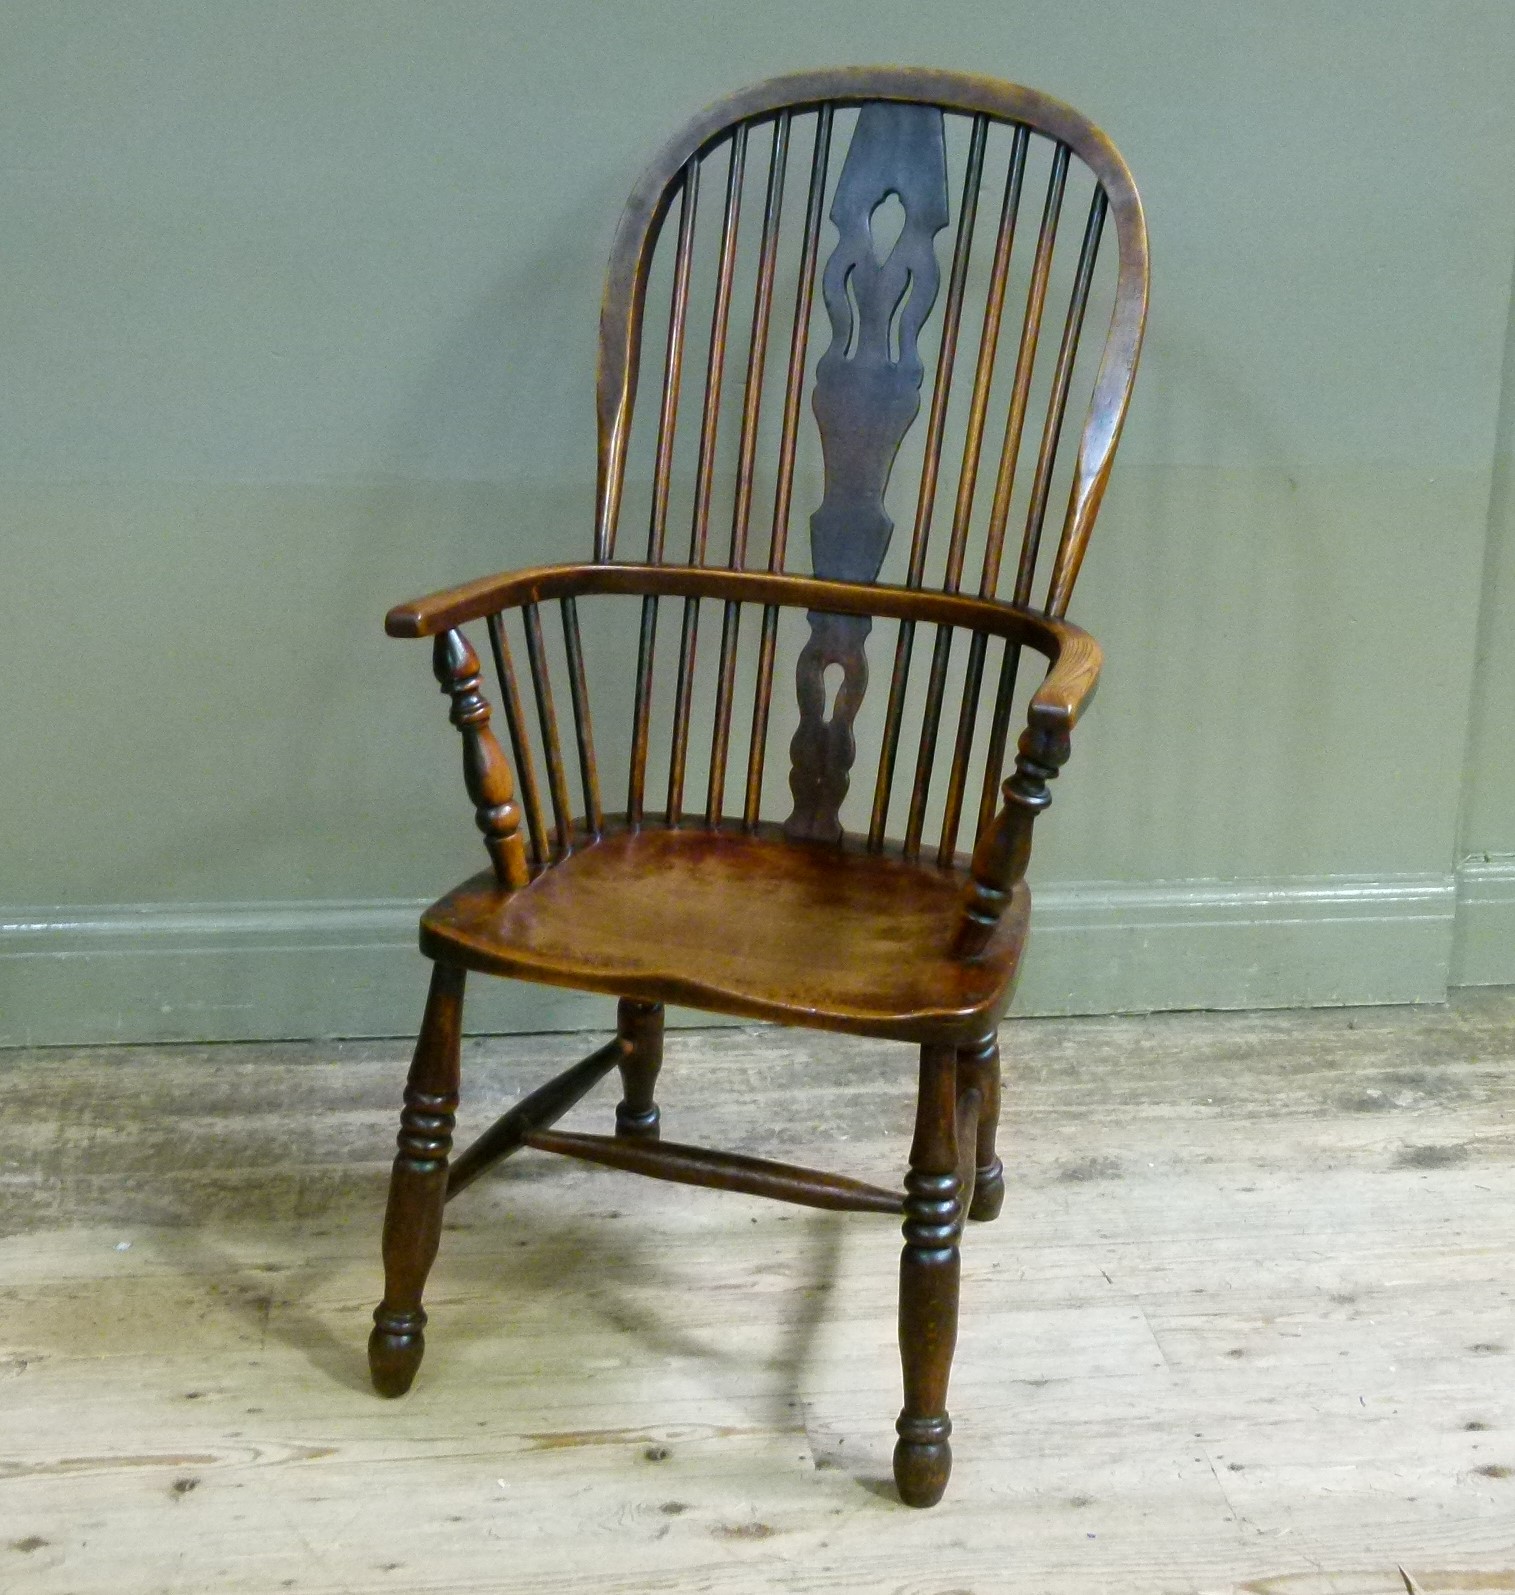 A late 19th century high back Windsor elbow chair with pierced splat, bordered seat on turned legs